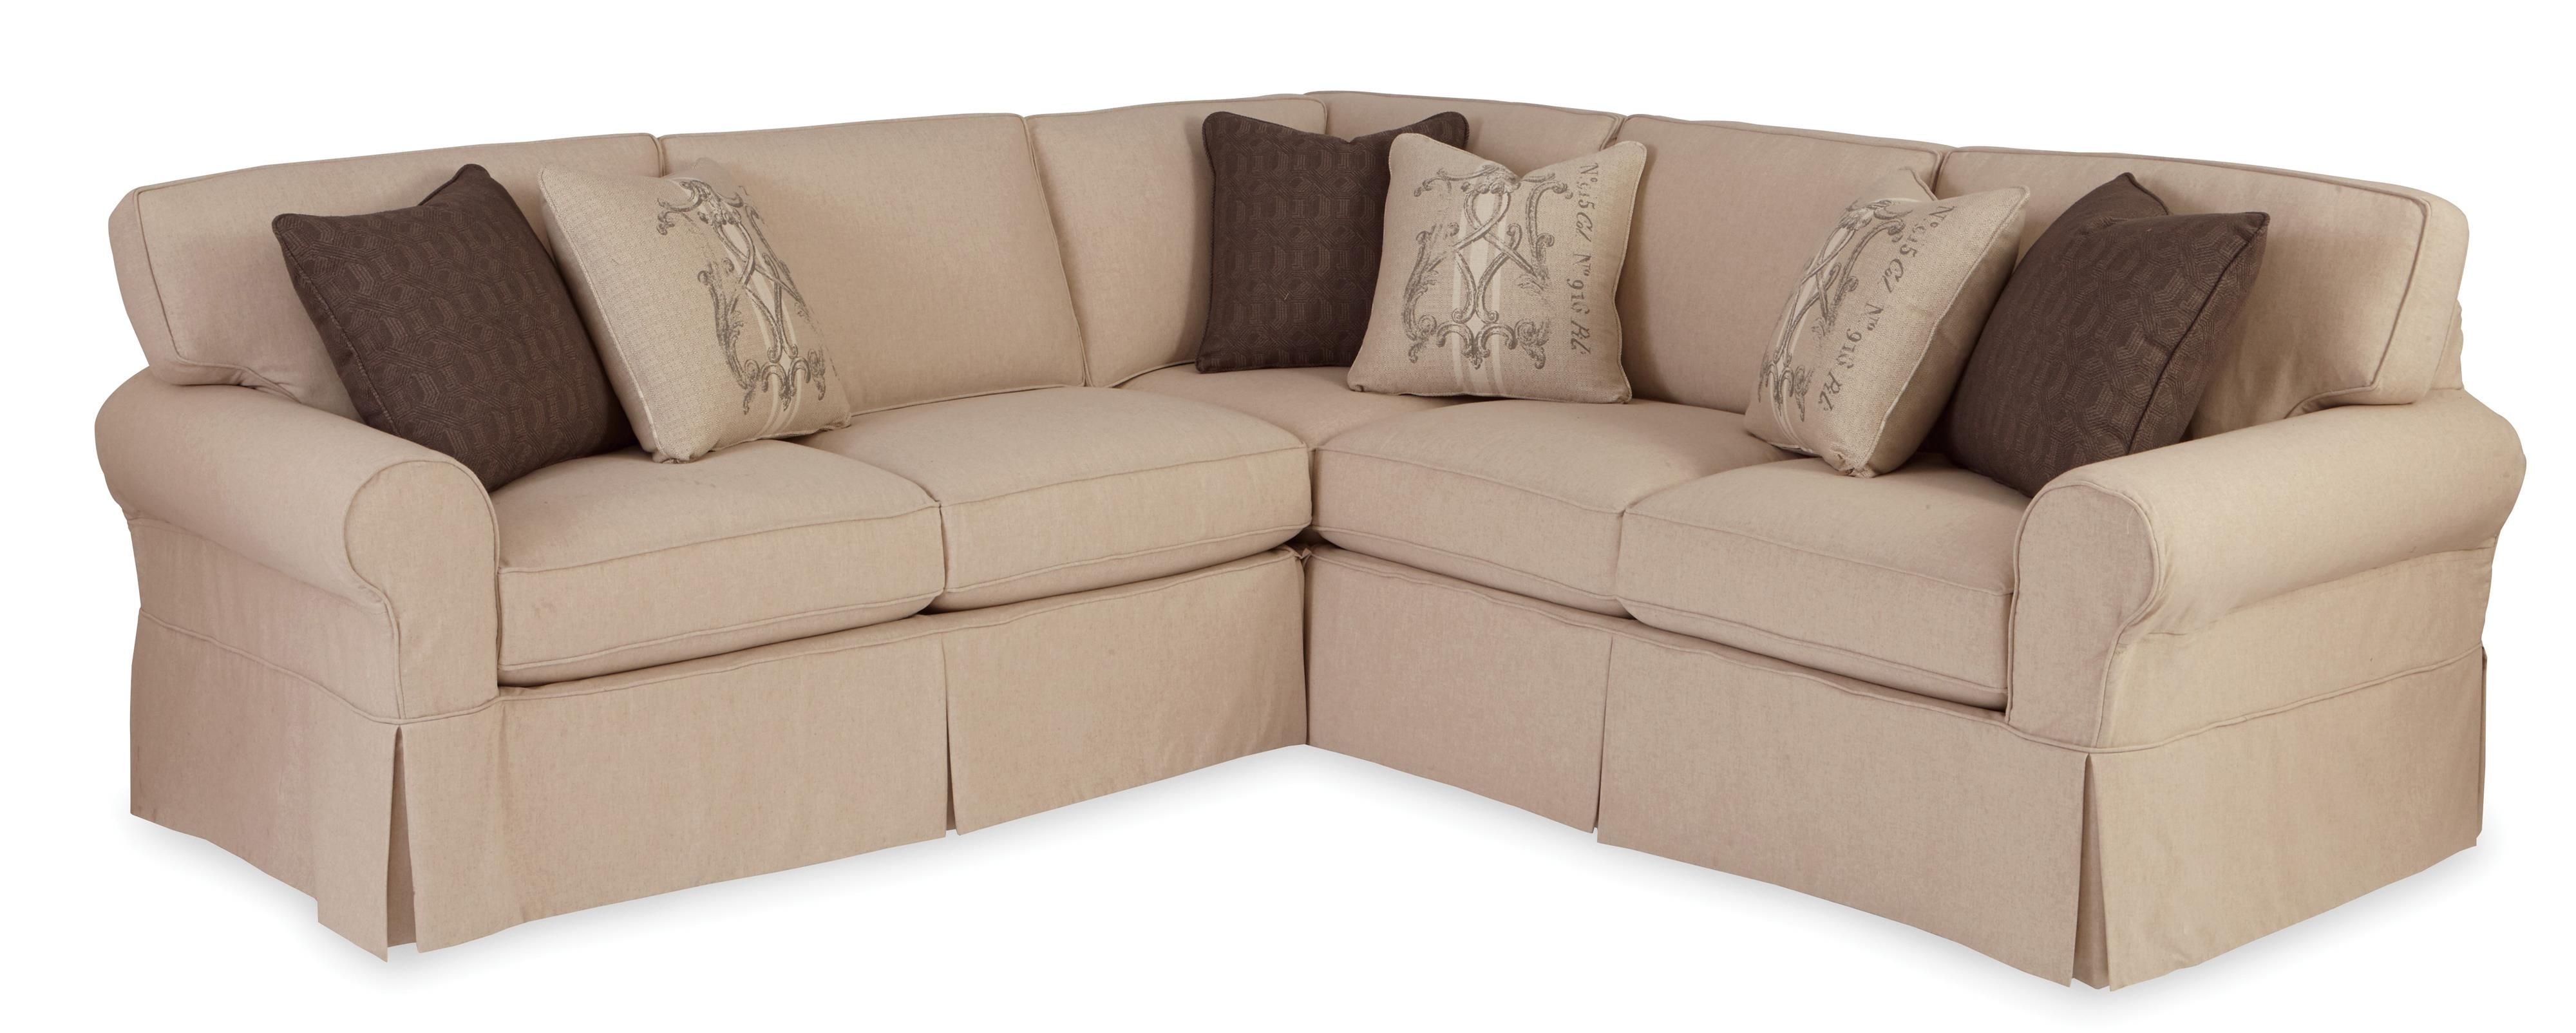 Sofas Center Sectional Diy Slipcover For Sofa With Chaisedys With Regard To Craftsman Sectional Sofa (Photo 11 of 12)